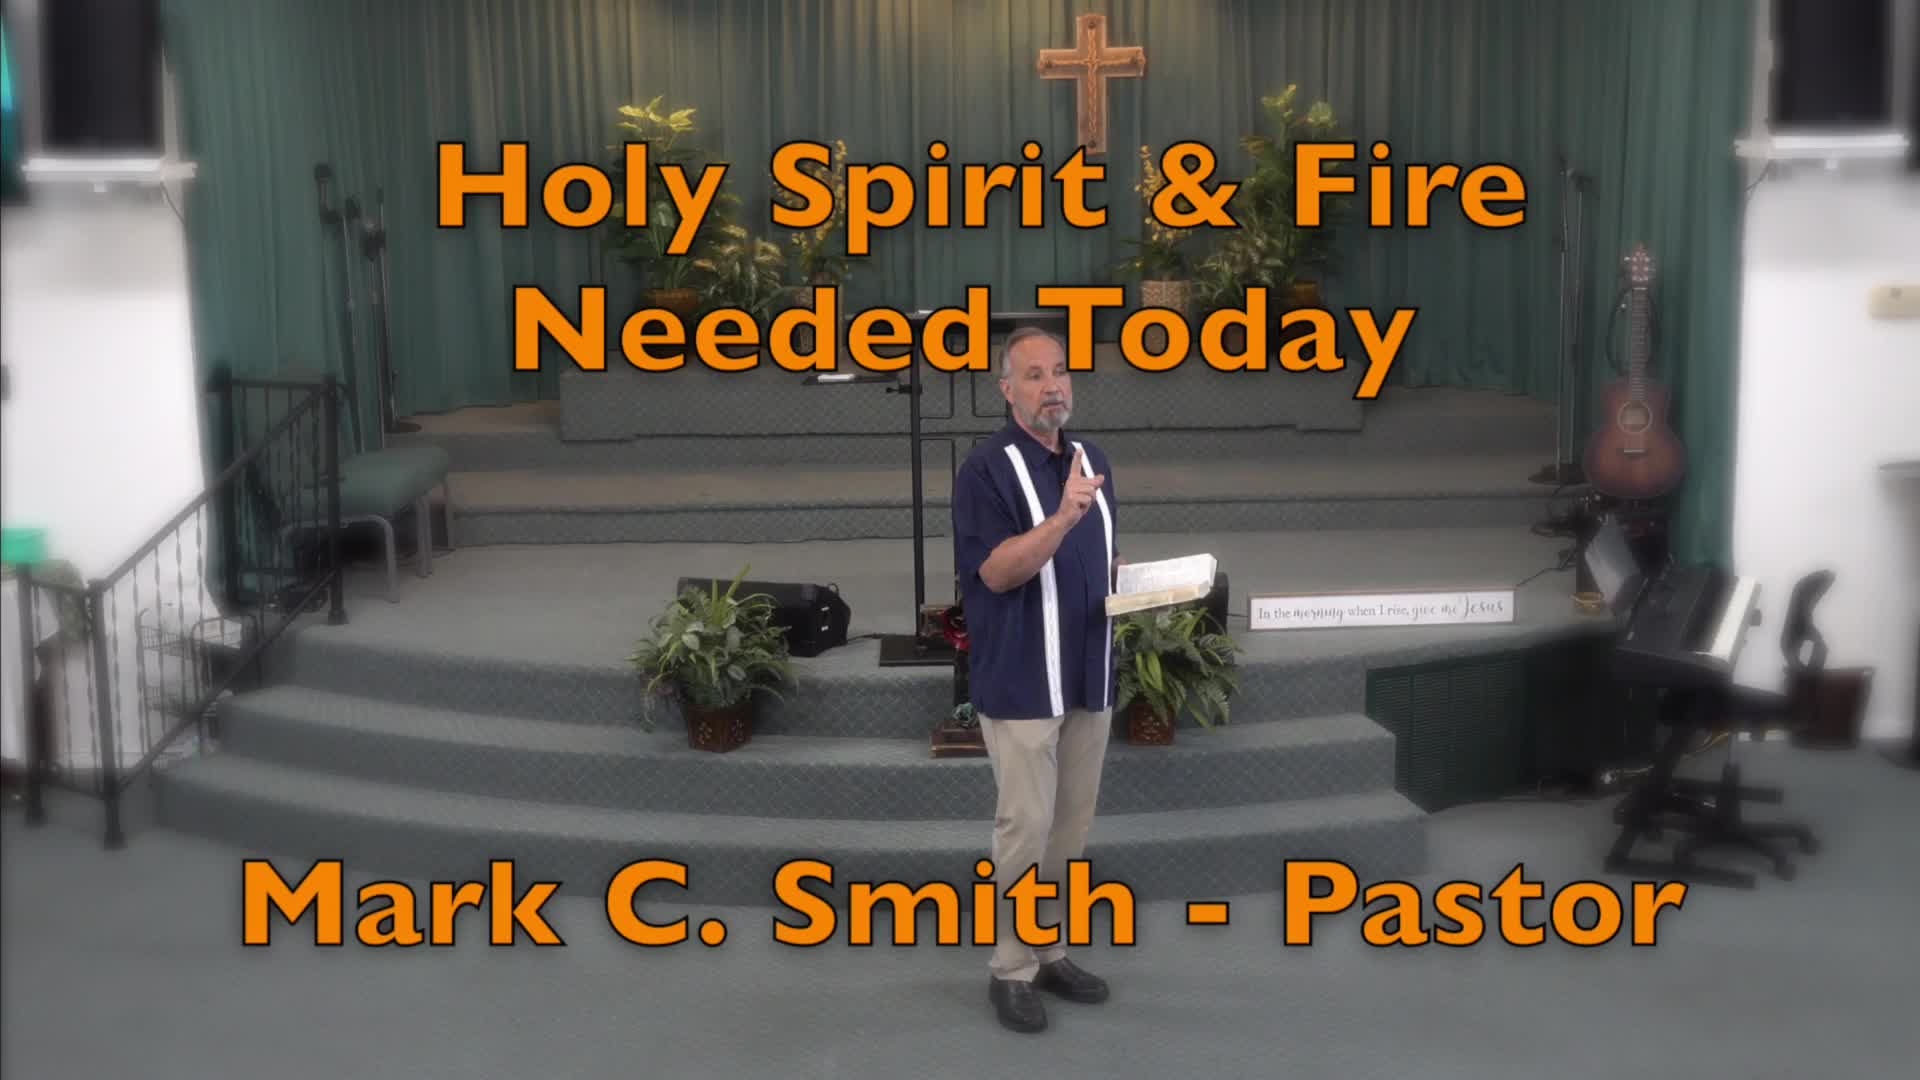  Holy Spirit & Fire Needed Today